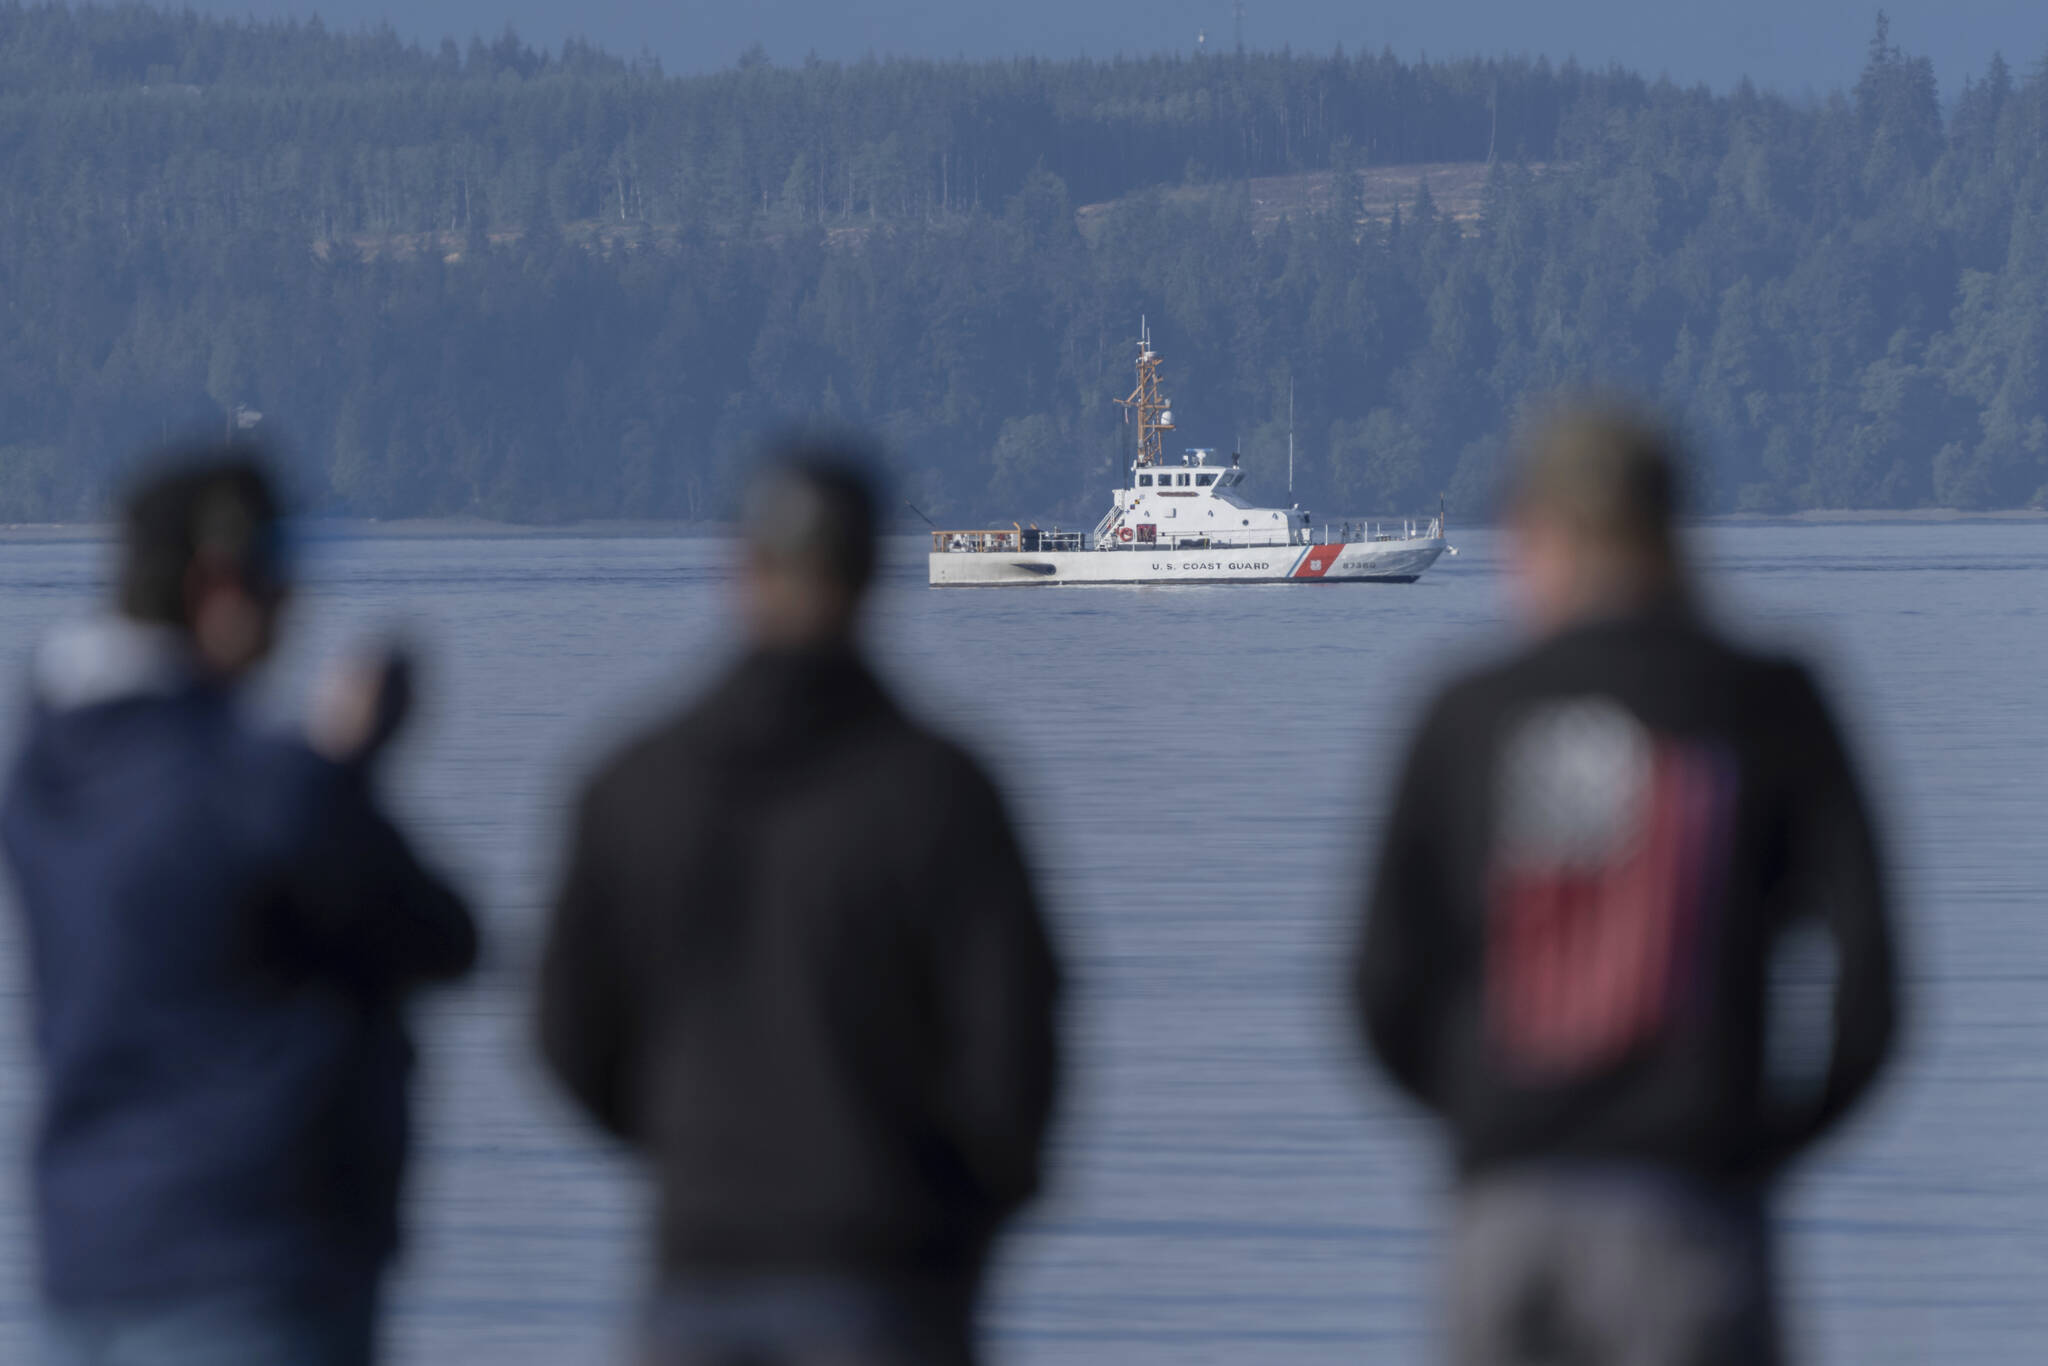 A U.S. Coast Guard vessel searches the area Monday near Freeland on Whidbey Island north of Seattle, where a chartered floatplane crashed the day before. The plane was en route from Friday Harbor to Renton. (Stephen Brashear/The Associated Press)